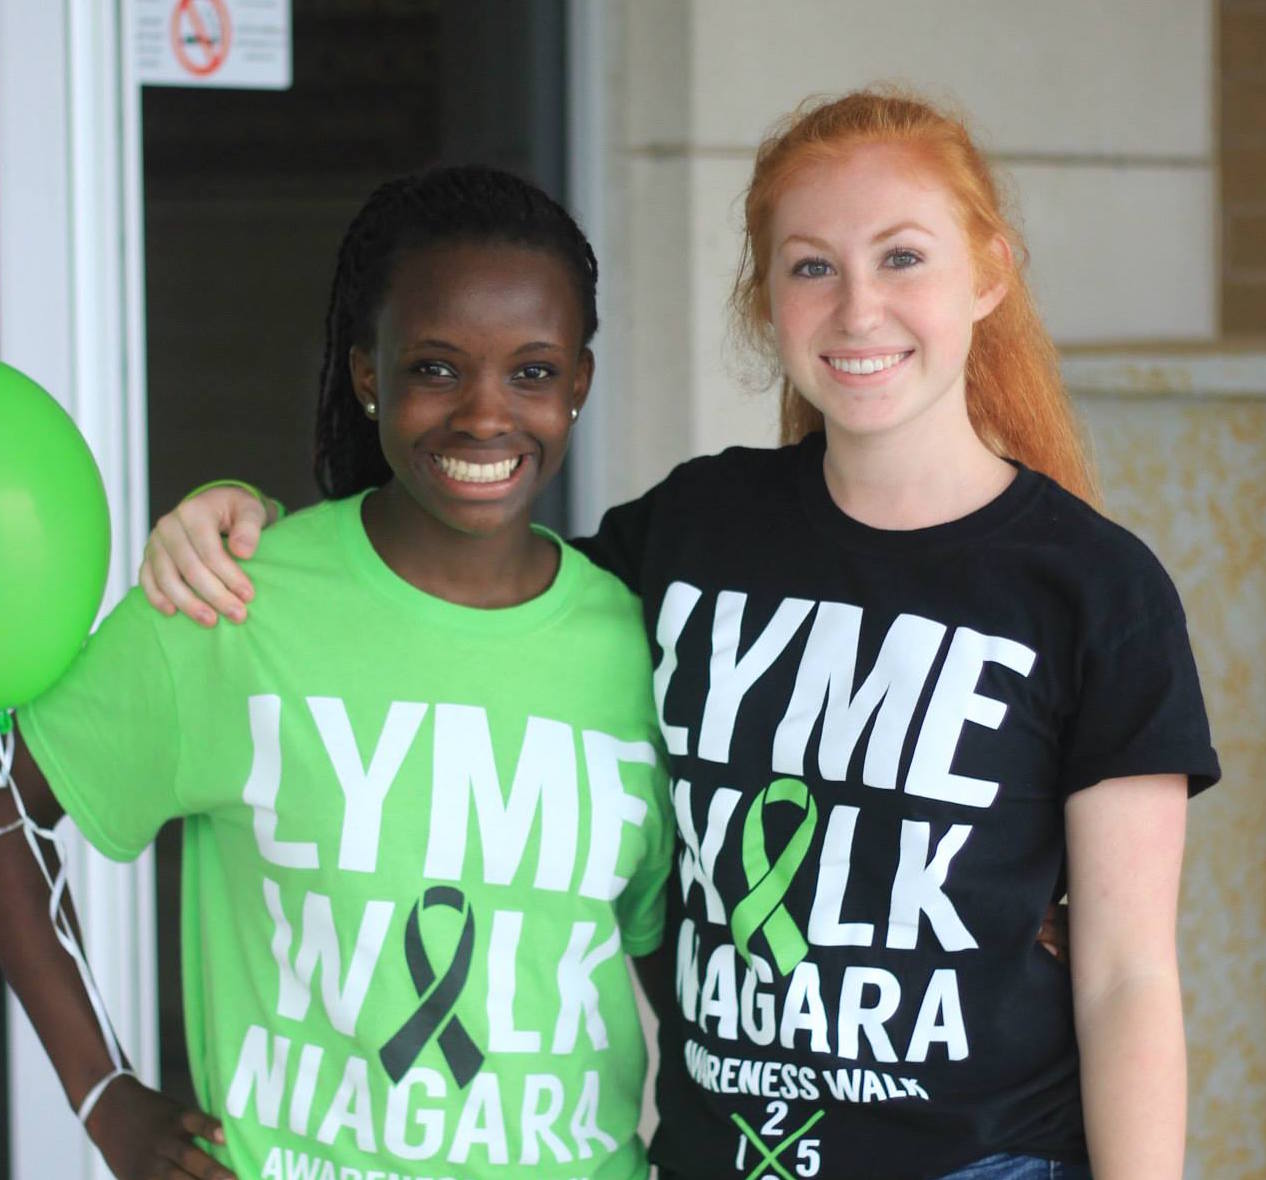 The author and her friend wearing Lyme Walk t-shirts